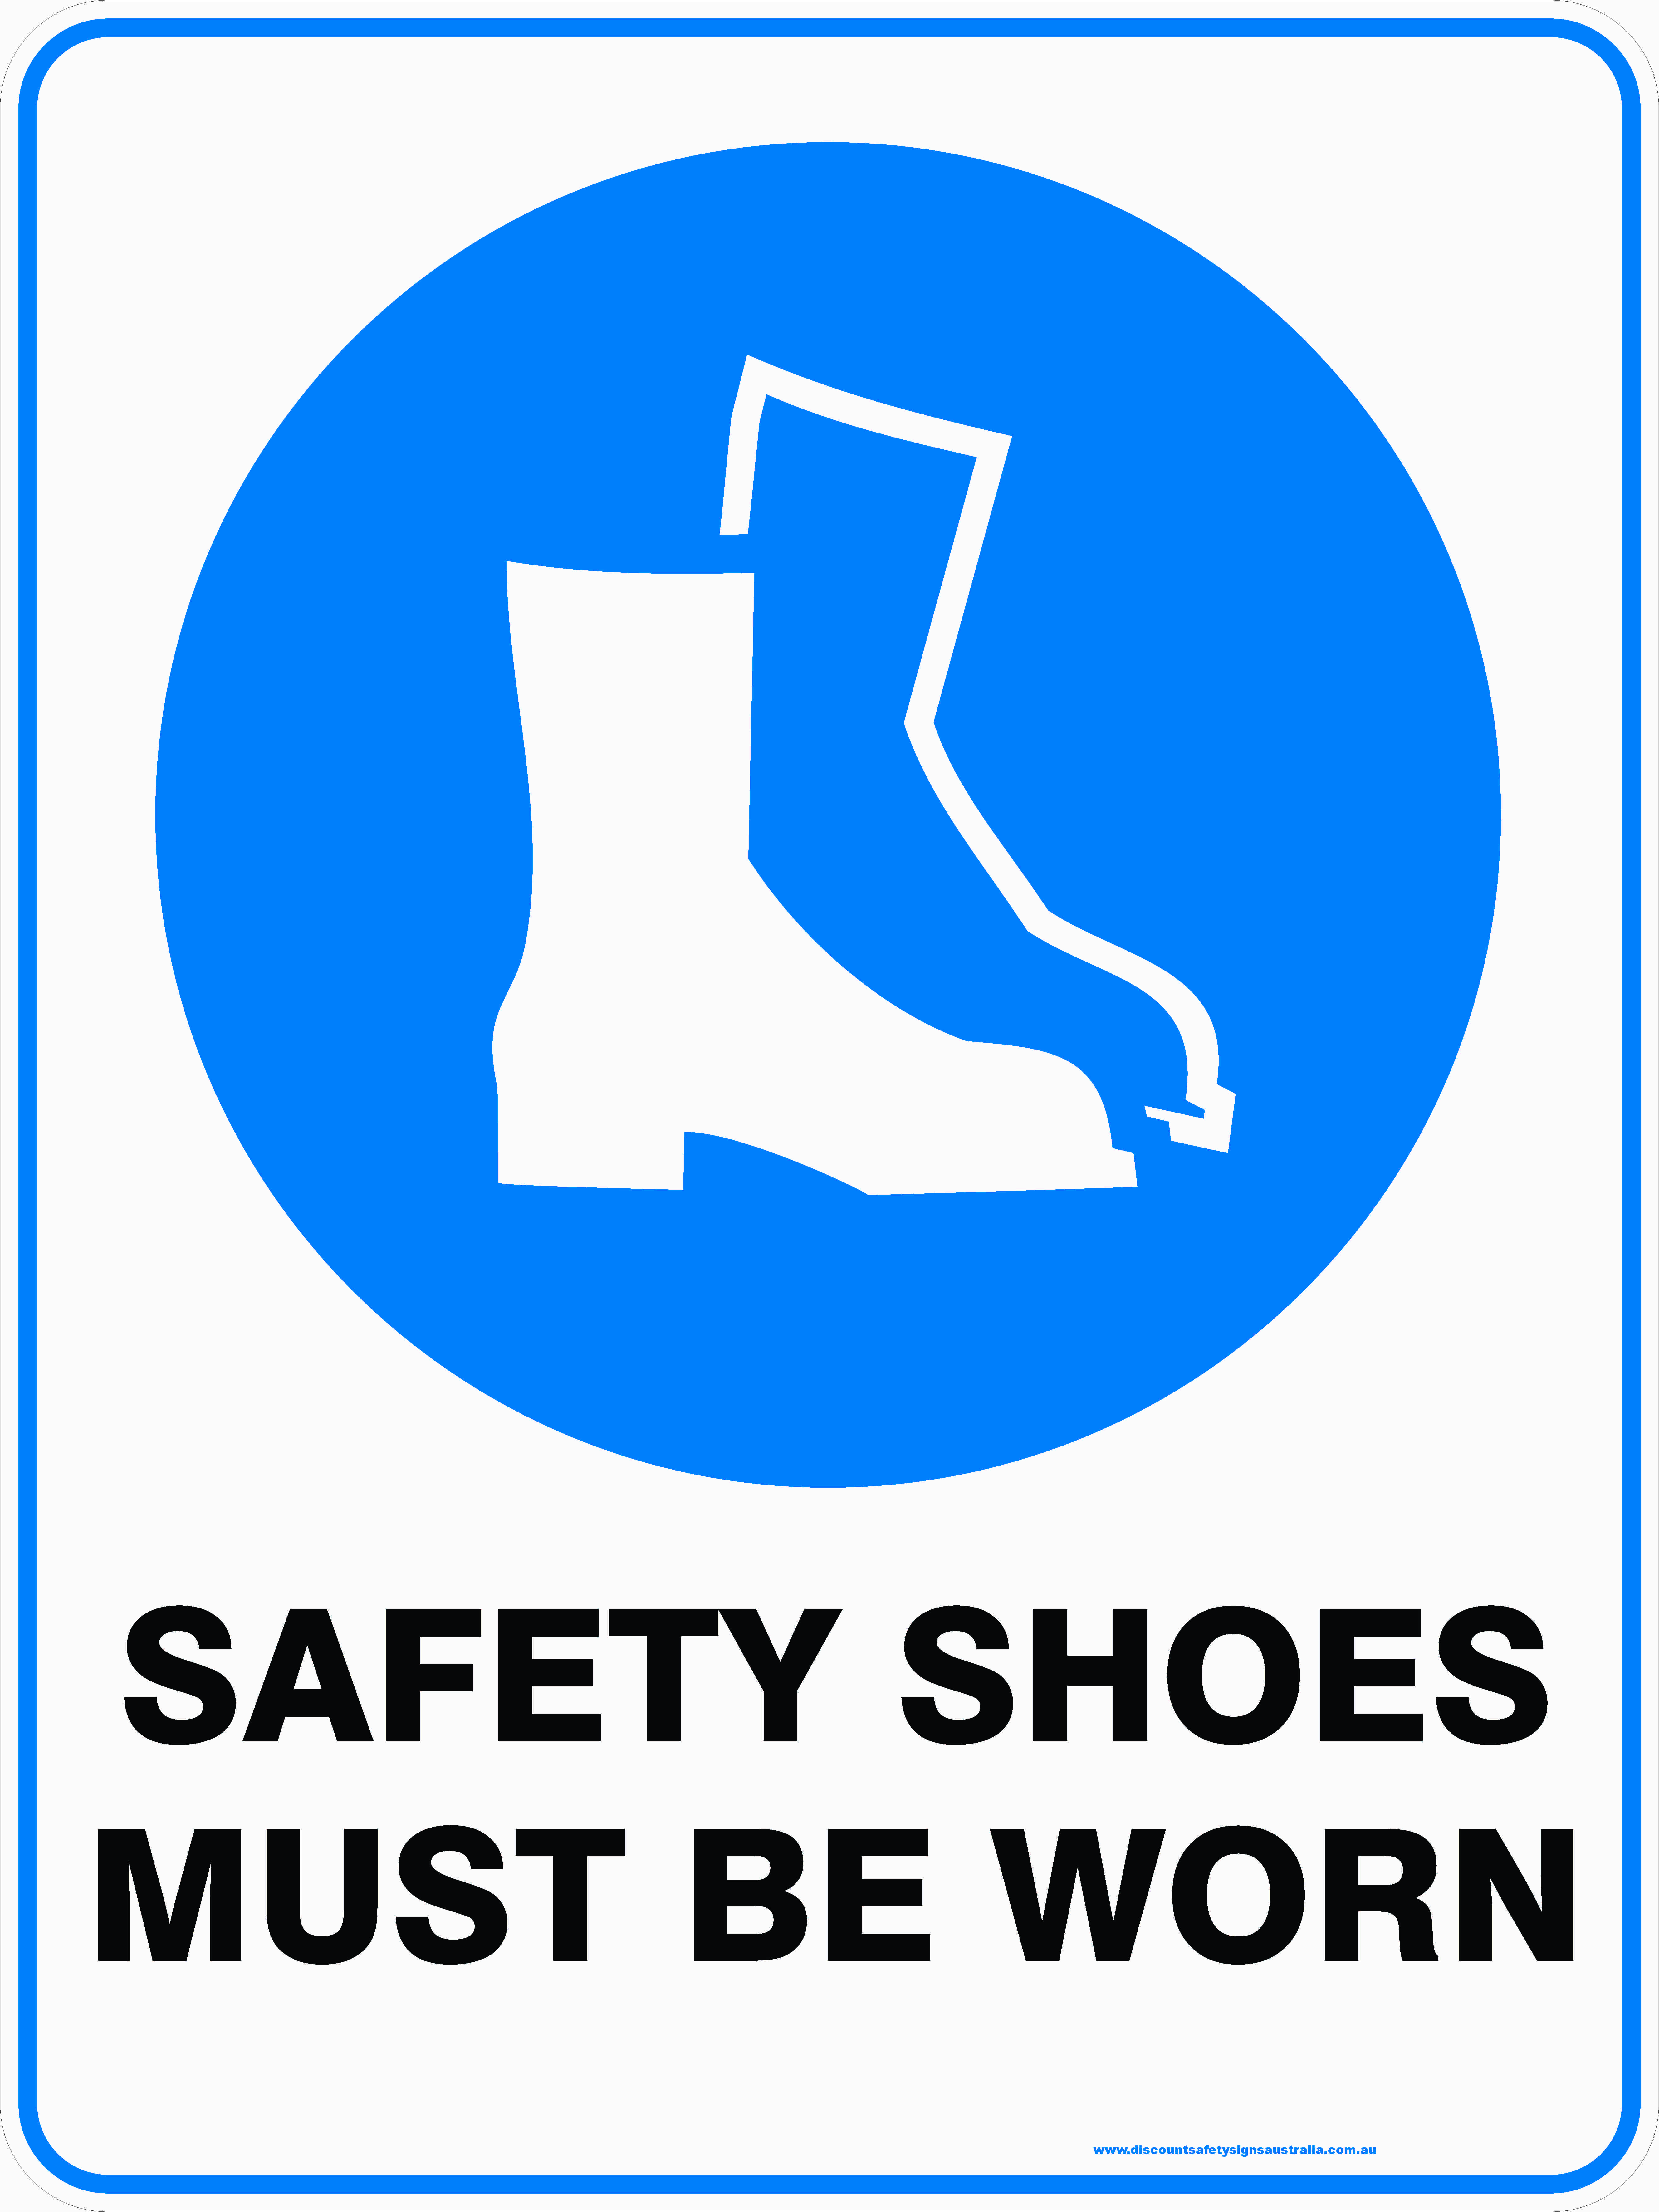 SAFETY SHOES MUST BE WORN | Discount Safety Signs Australia